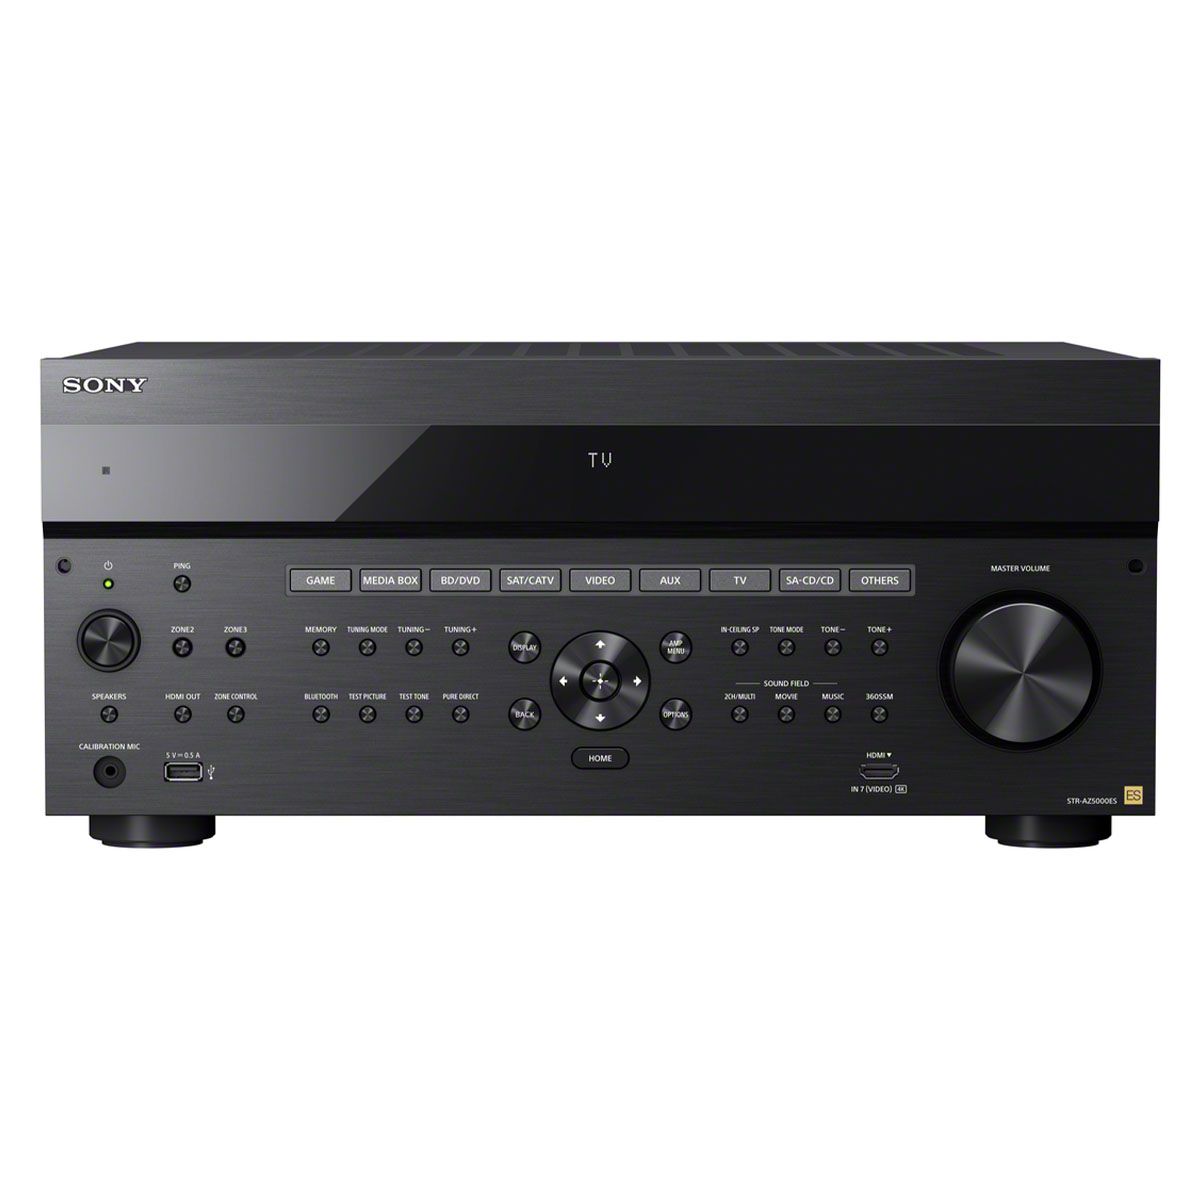 Sony STR-AZ5000ES Home Theater Receiver - front view without cover